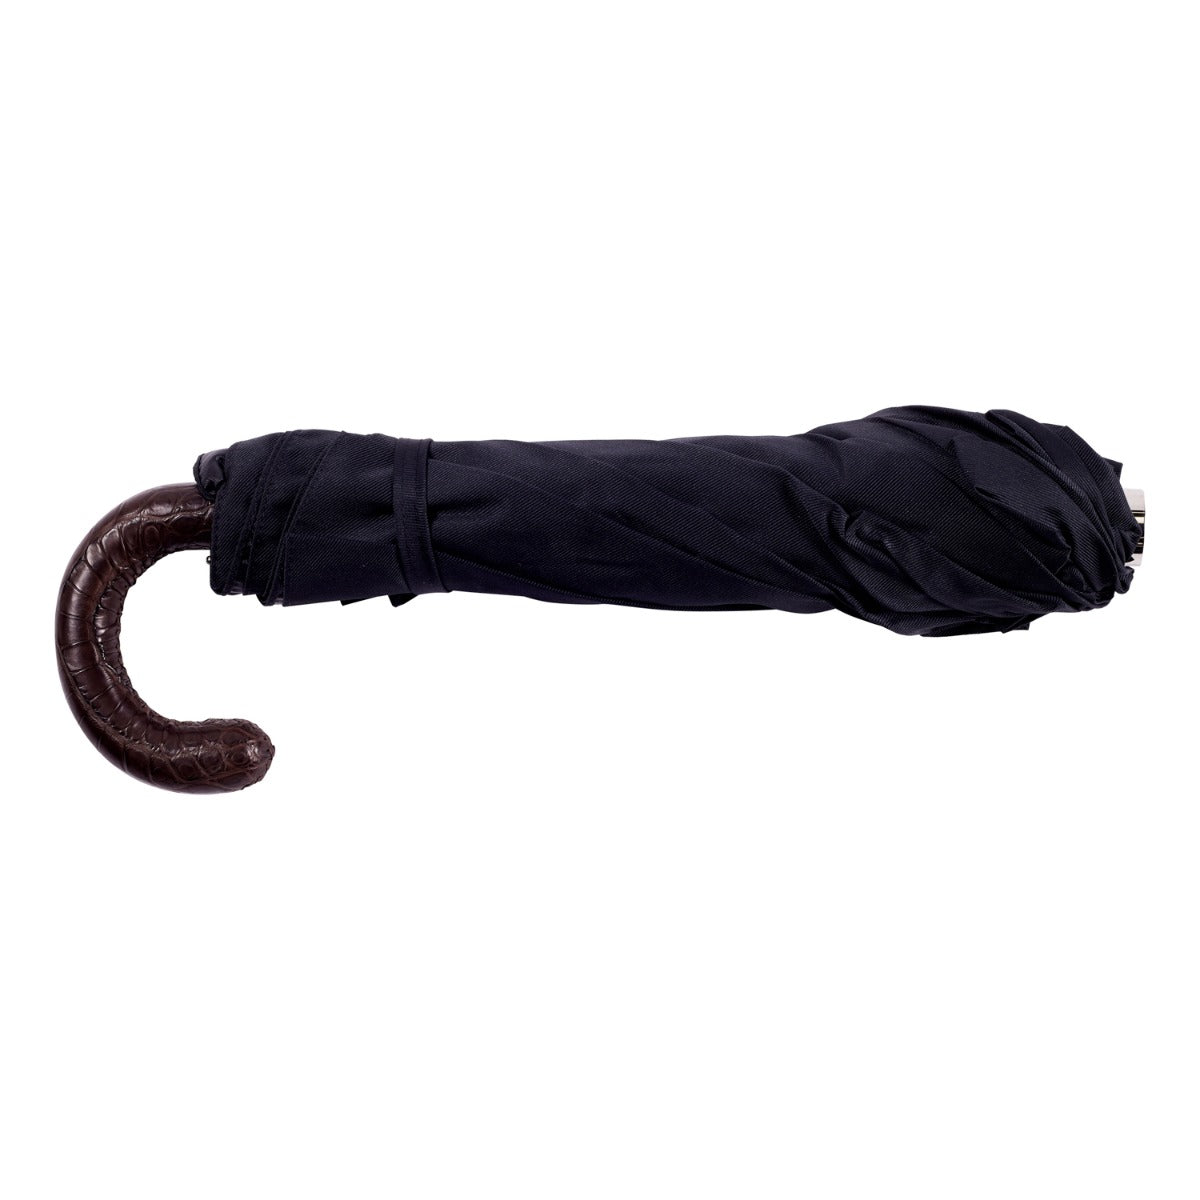 A KirbyAllison.com Brown Alligator Travel Umbrella with Black Canopy on a white background.